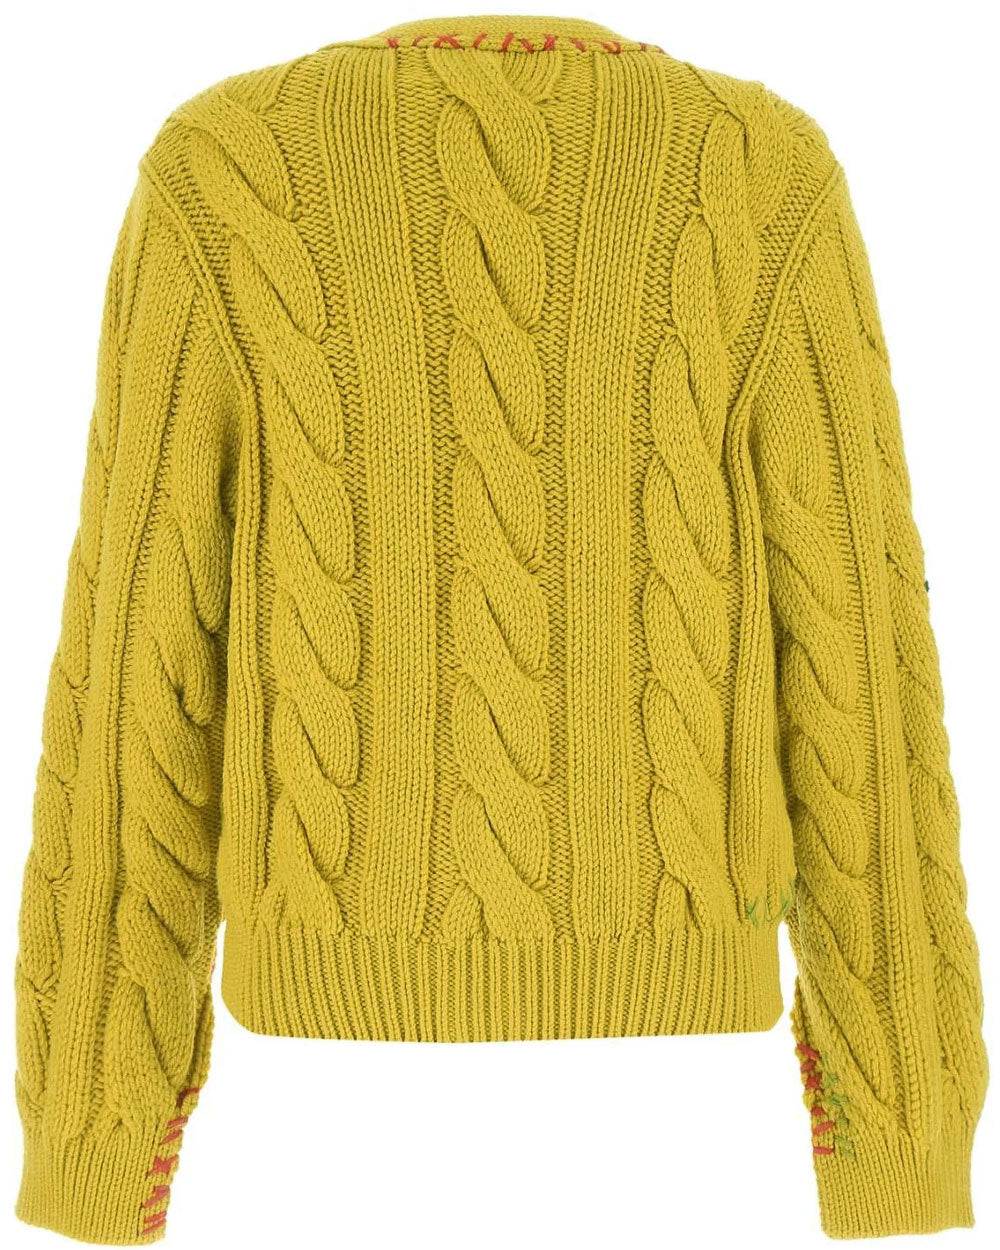 Chartreuse Cable Knit Cardigan